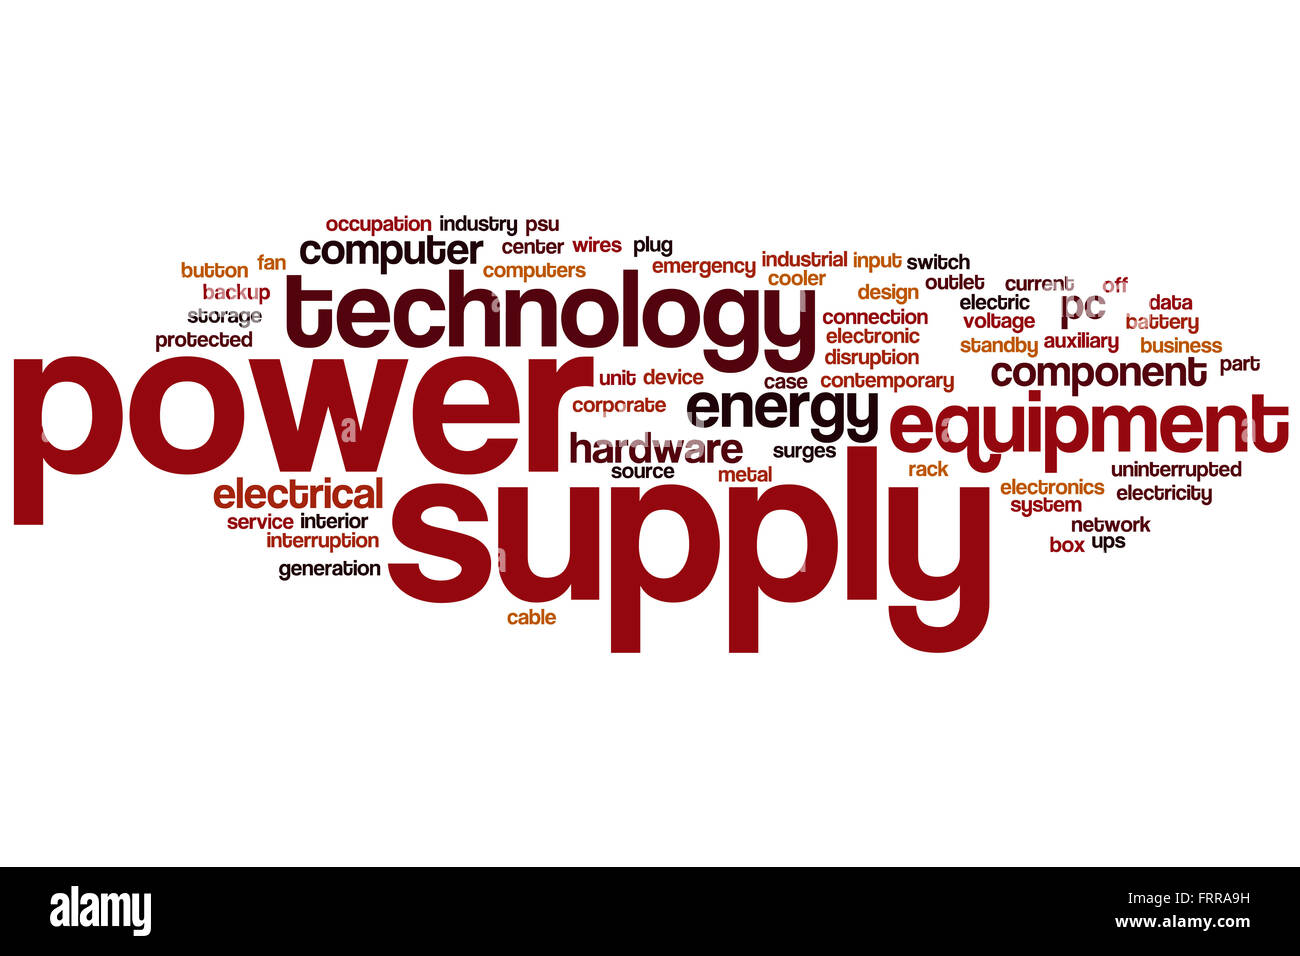 Power supply word cloud concept Stock Photo - Alamy